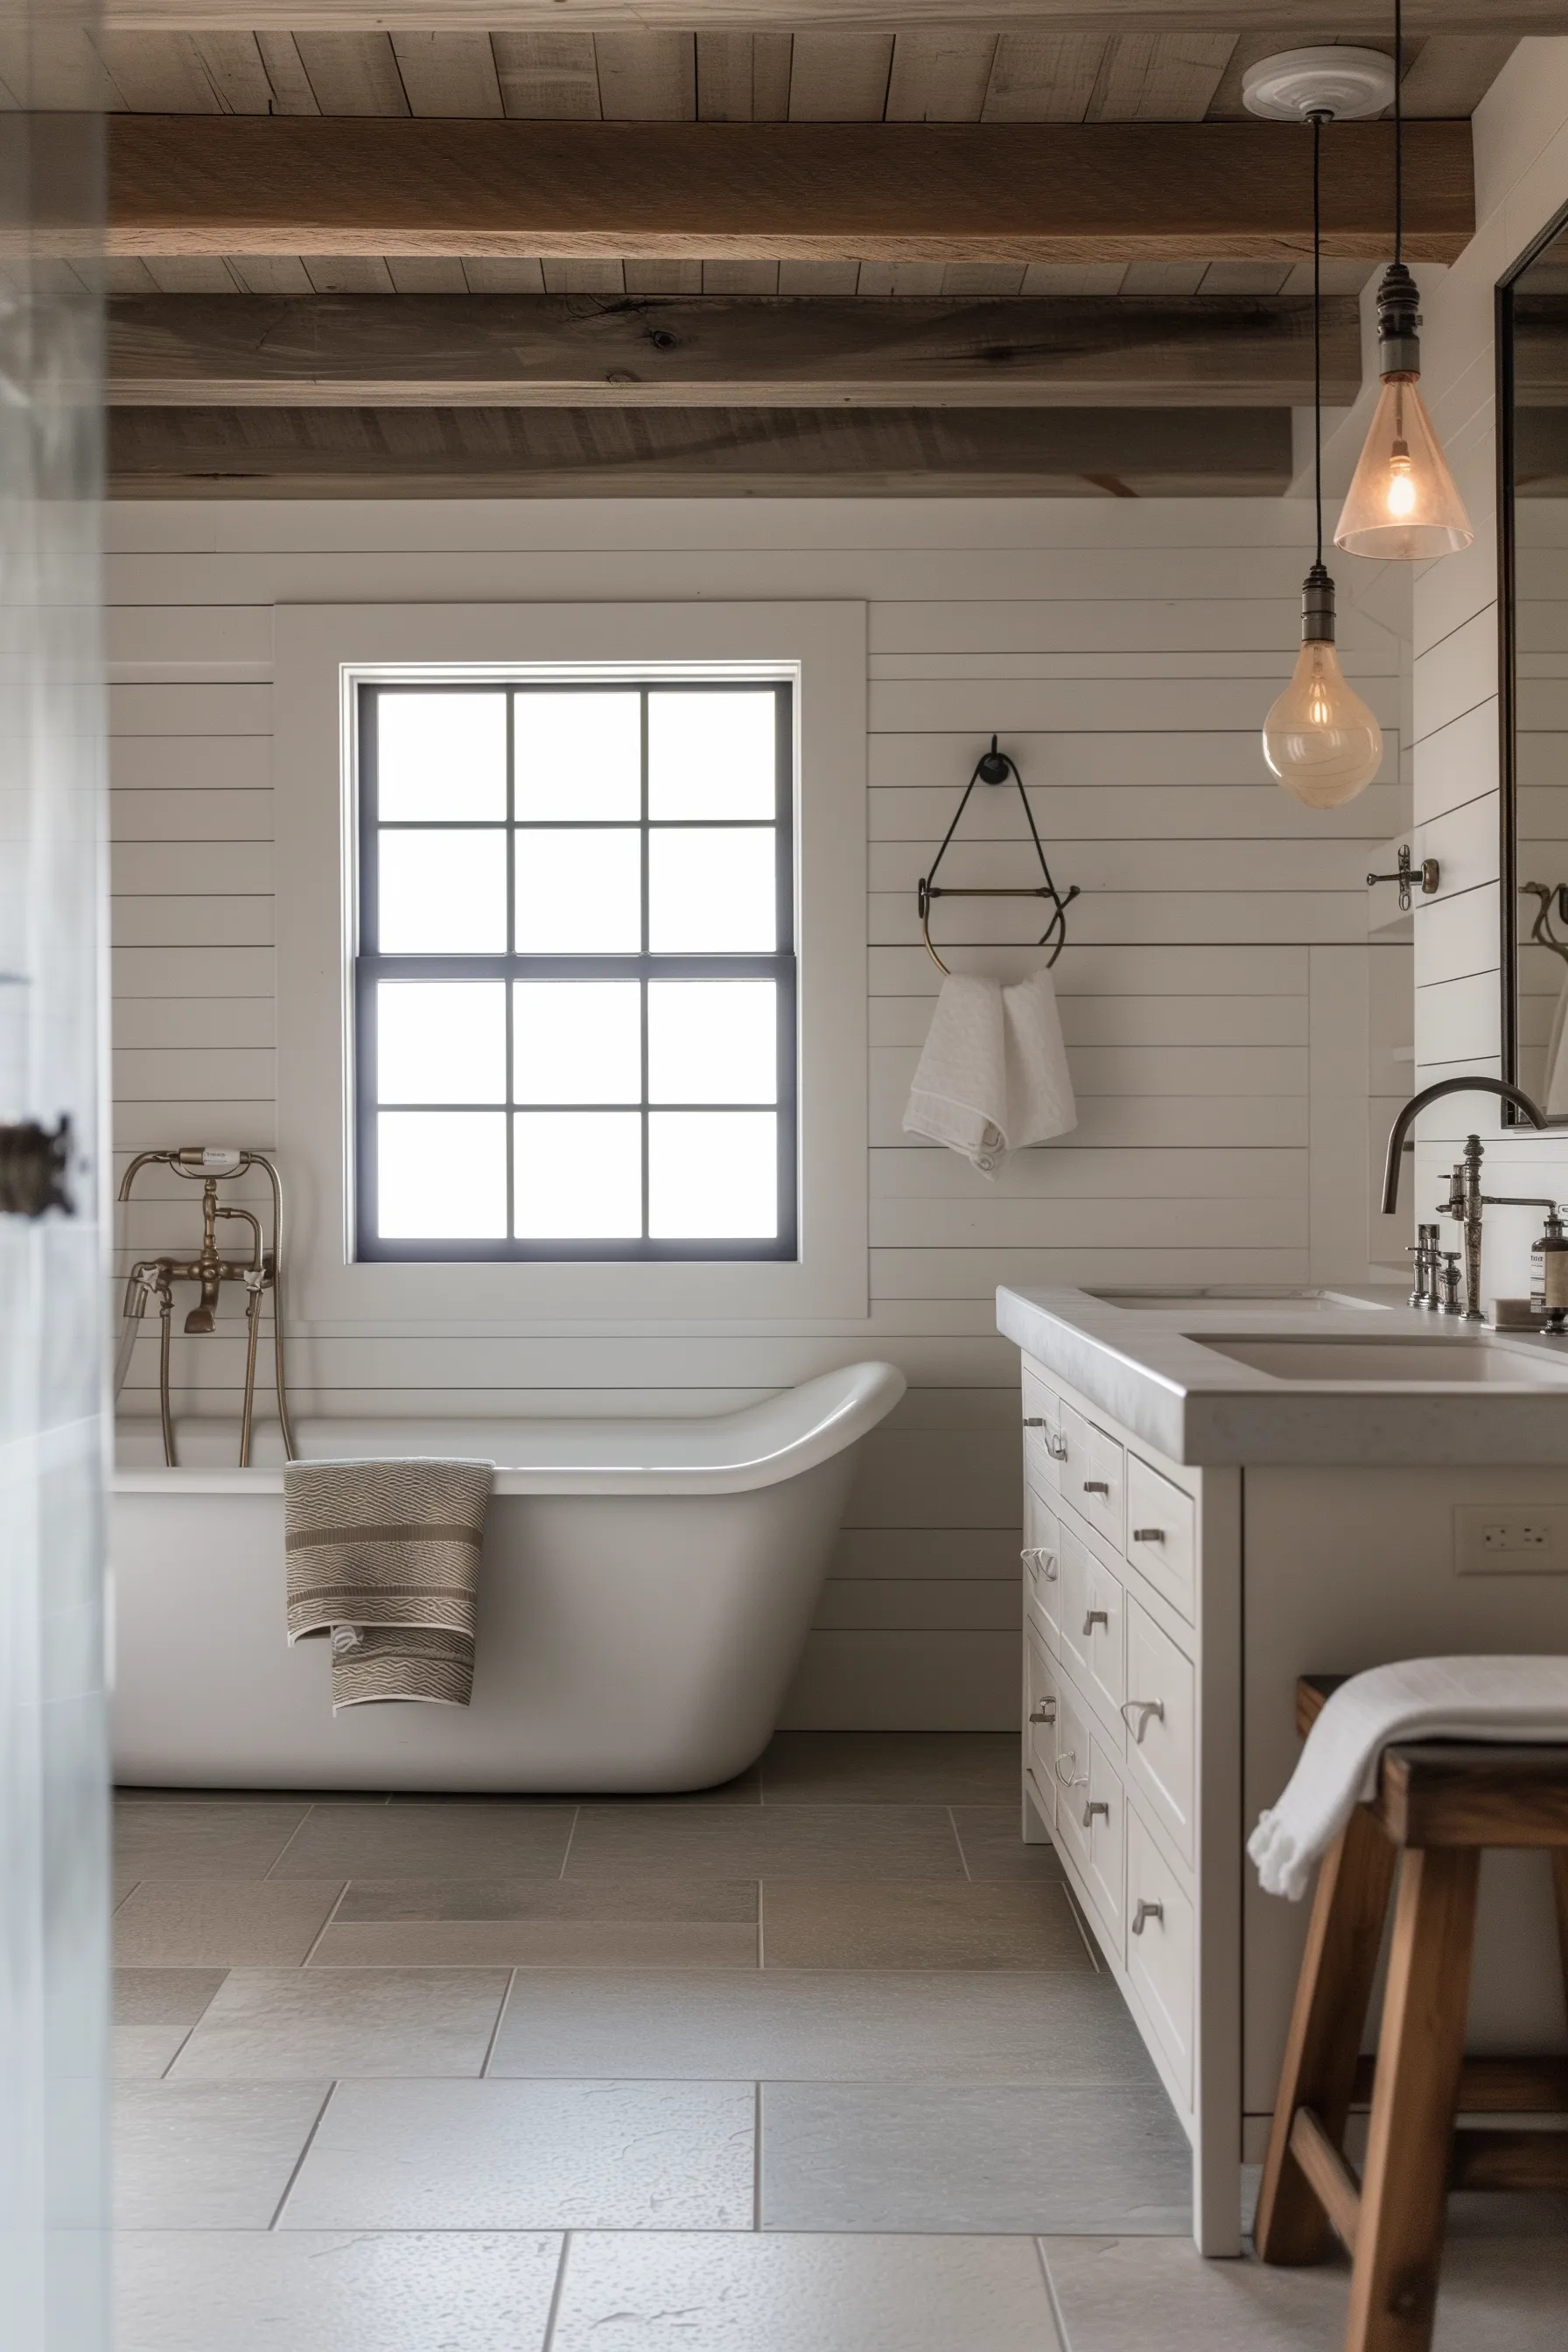 A white bathroom with a bath tub, wooden stool and rustic lighting.